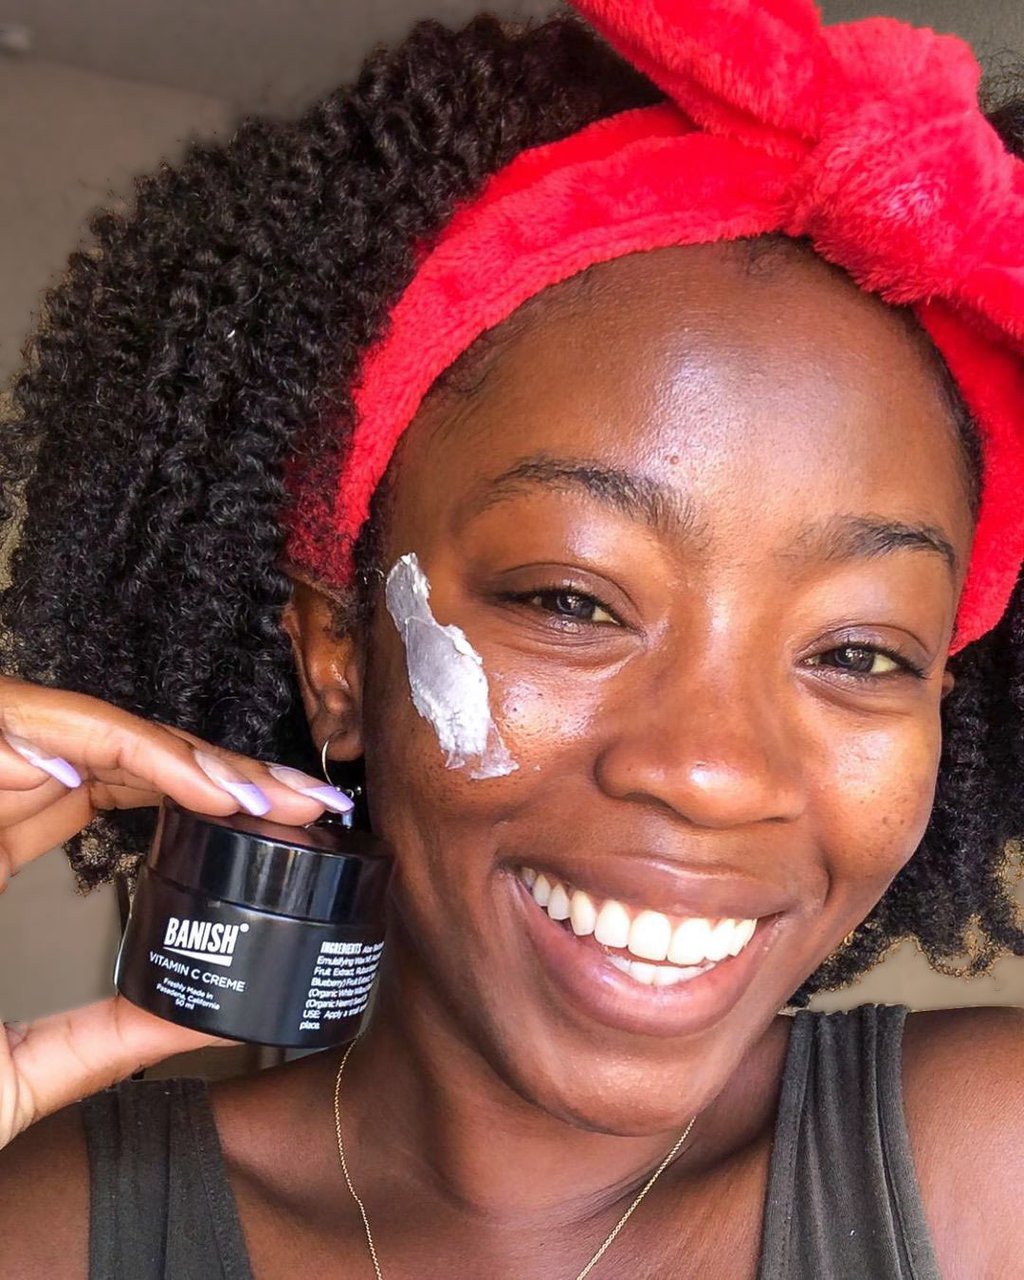 Ideas For Self-Care: 27 Brilliant  Products To Pamper Yourself